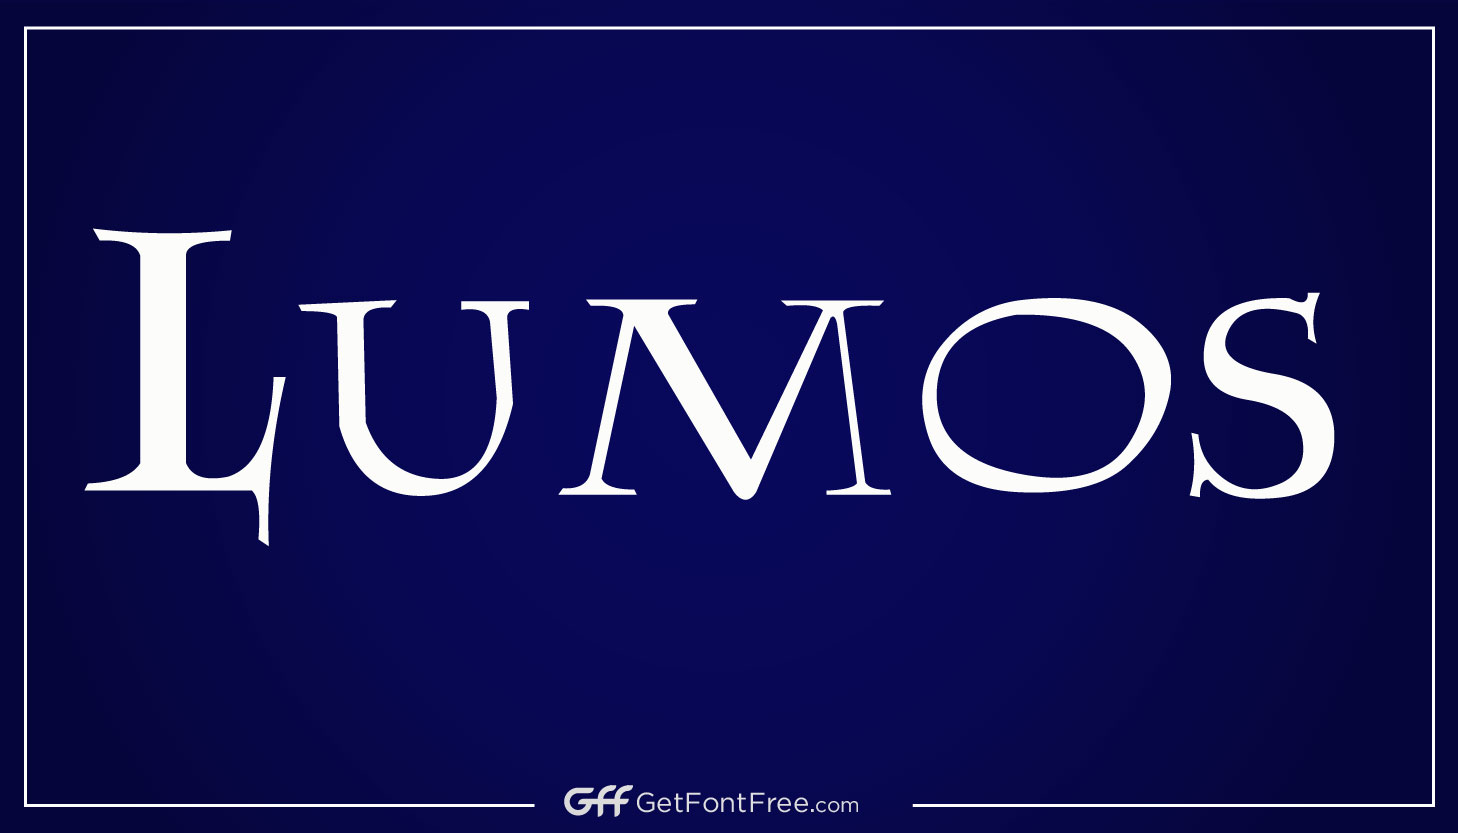 Lumos Font is a free font designed by Andrew Herndon. It is a clean and modern sans-serif font that is suitable for use in a variety of design projects, such as headlines, titles, and body text. The font features regular and bold weights and includes uppercase and lowercase letters, numbers, and punctuation. It can be downloaded and used for personal or commercial projects.